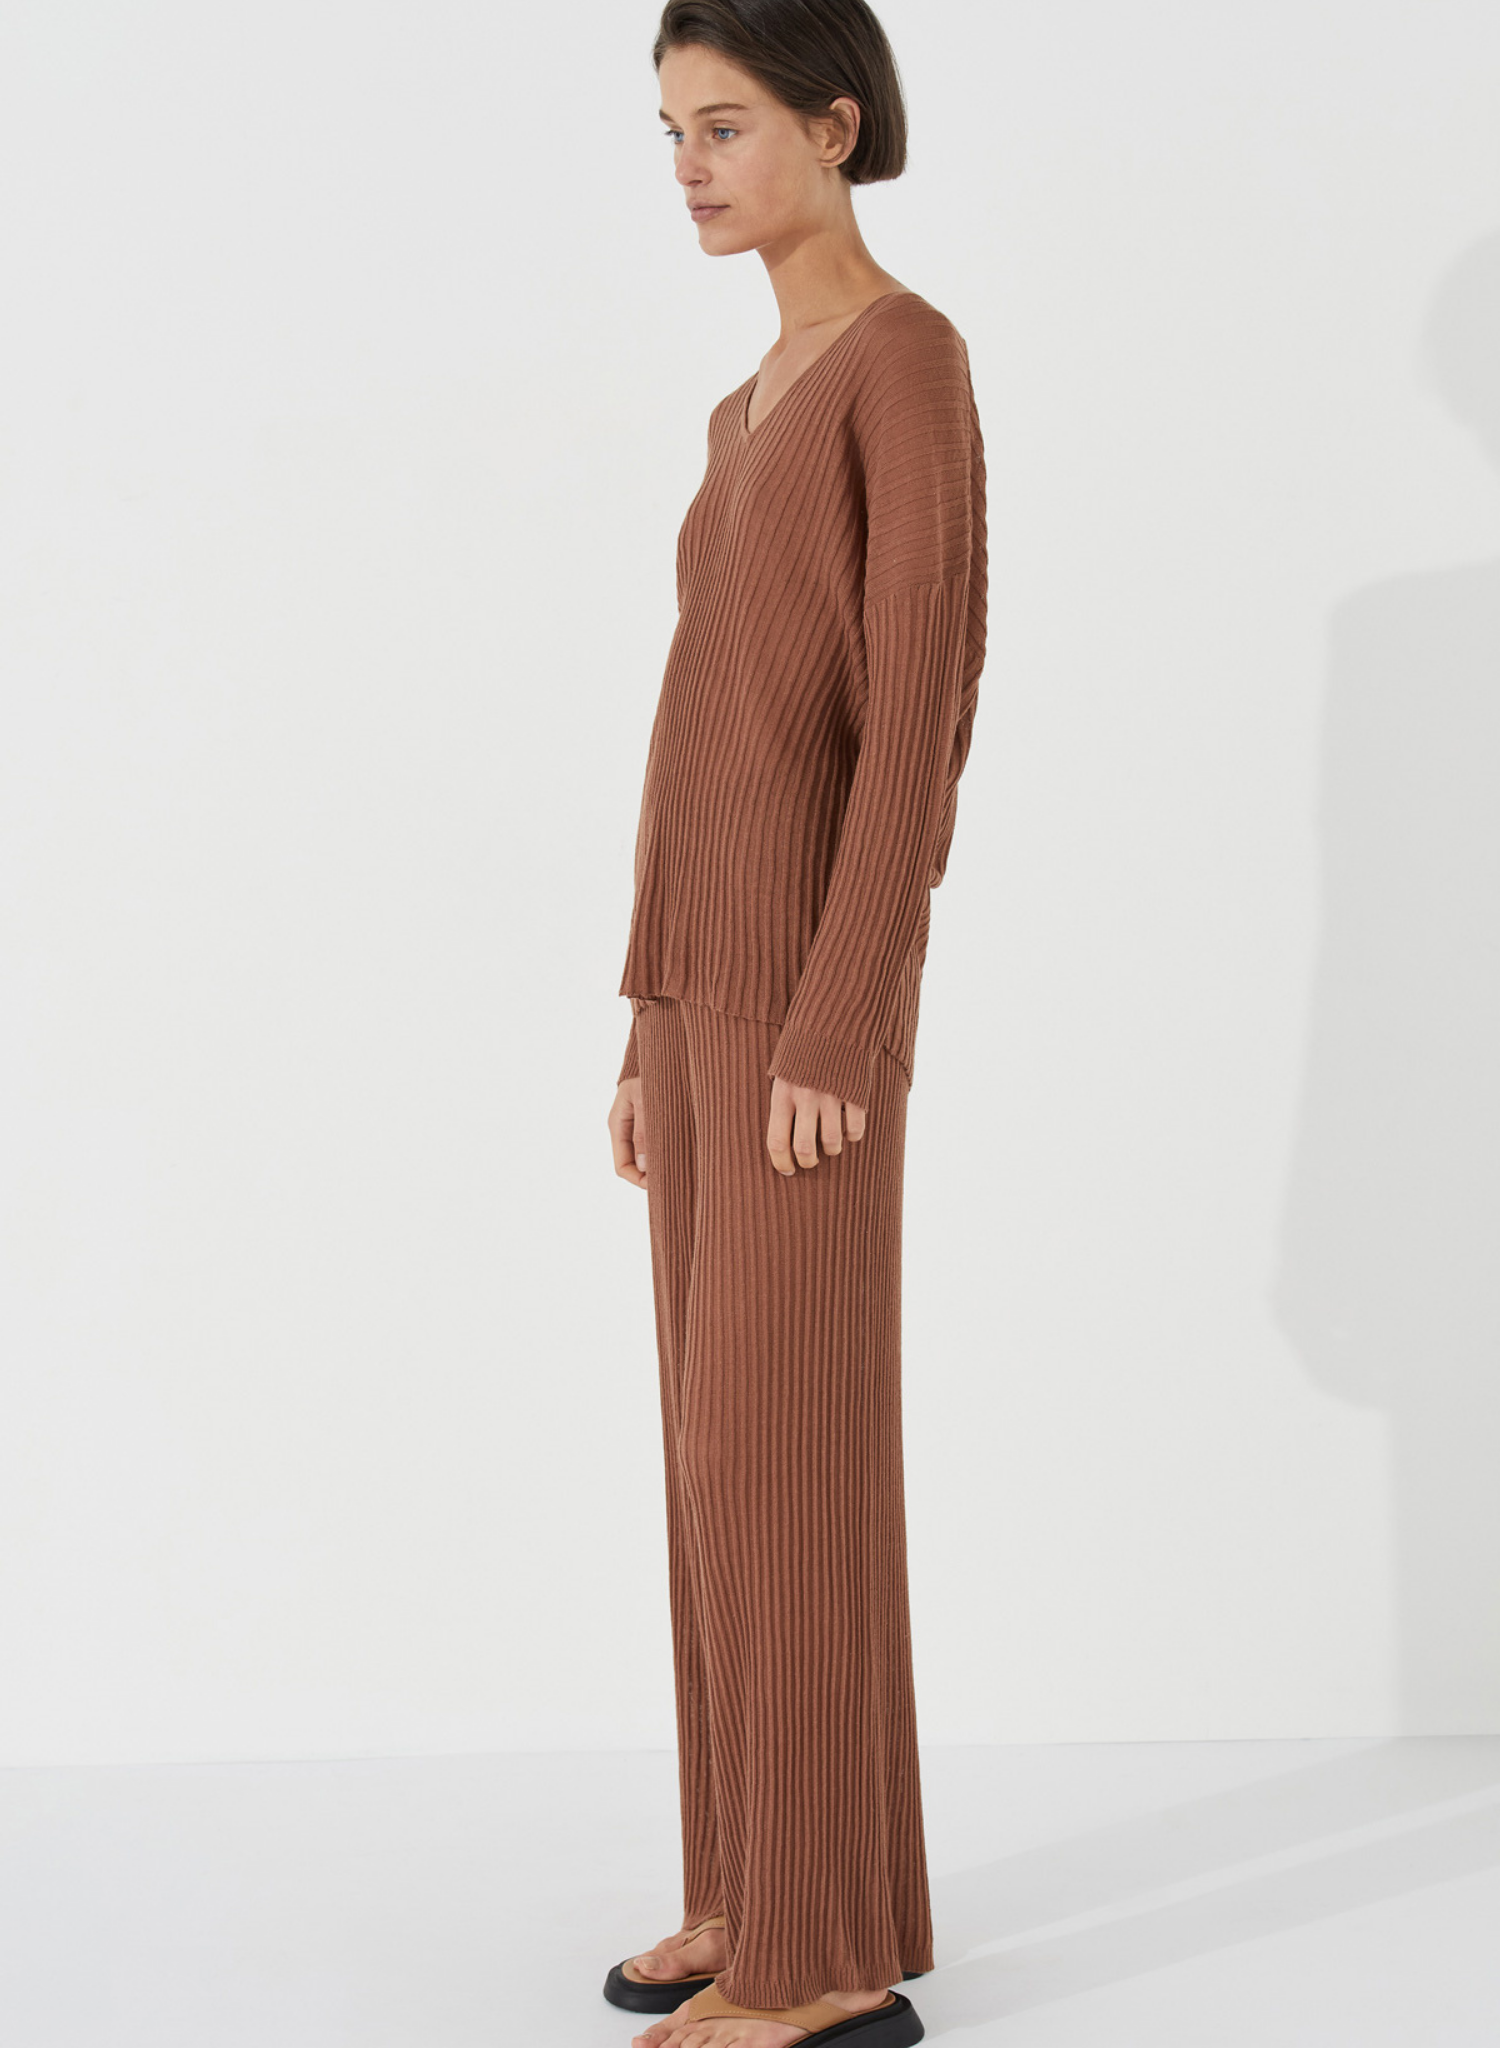 The Ribbed Knit Pant by Zulu & Zephyr is a soft sheer textured piece featuring a wide long leg and thin elasticated waistband for comfort and versatility with fit. Inspired by the drape of tactile cloth and soft organic forms, this transeasonal essential may be paired with the coordinating Ribbed Knit Top - Earth.